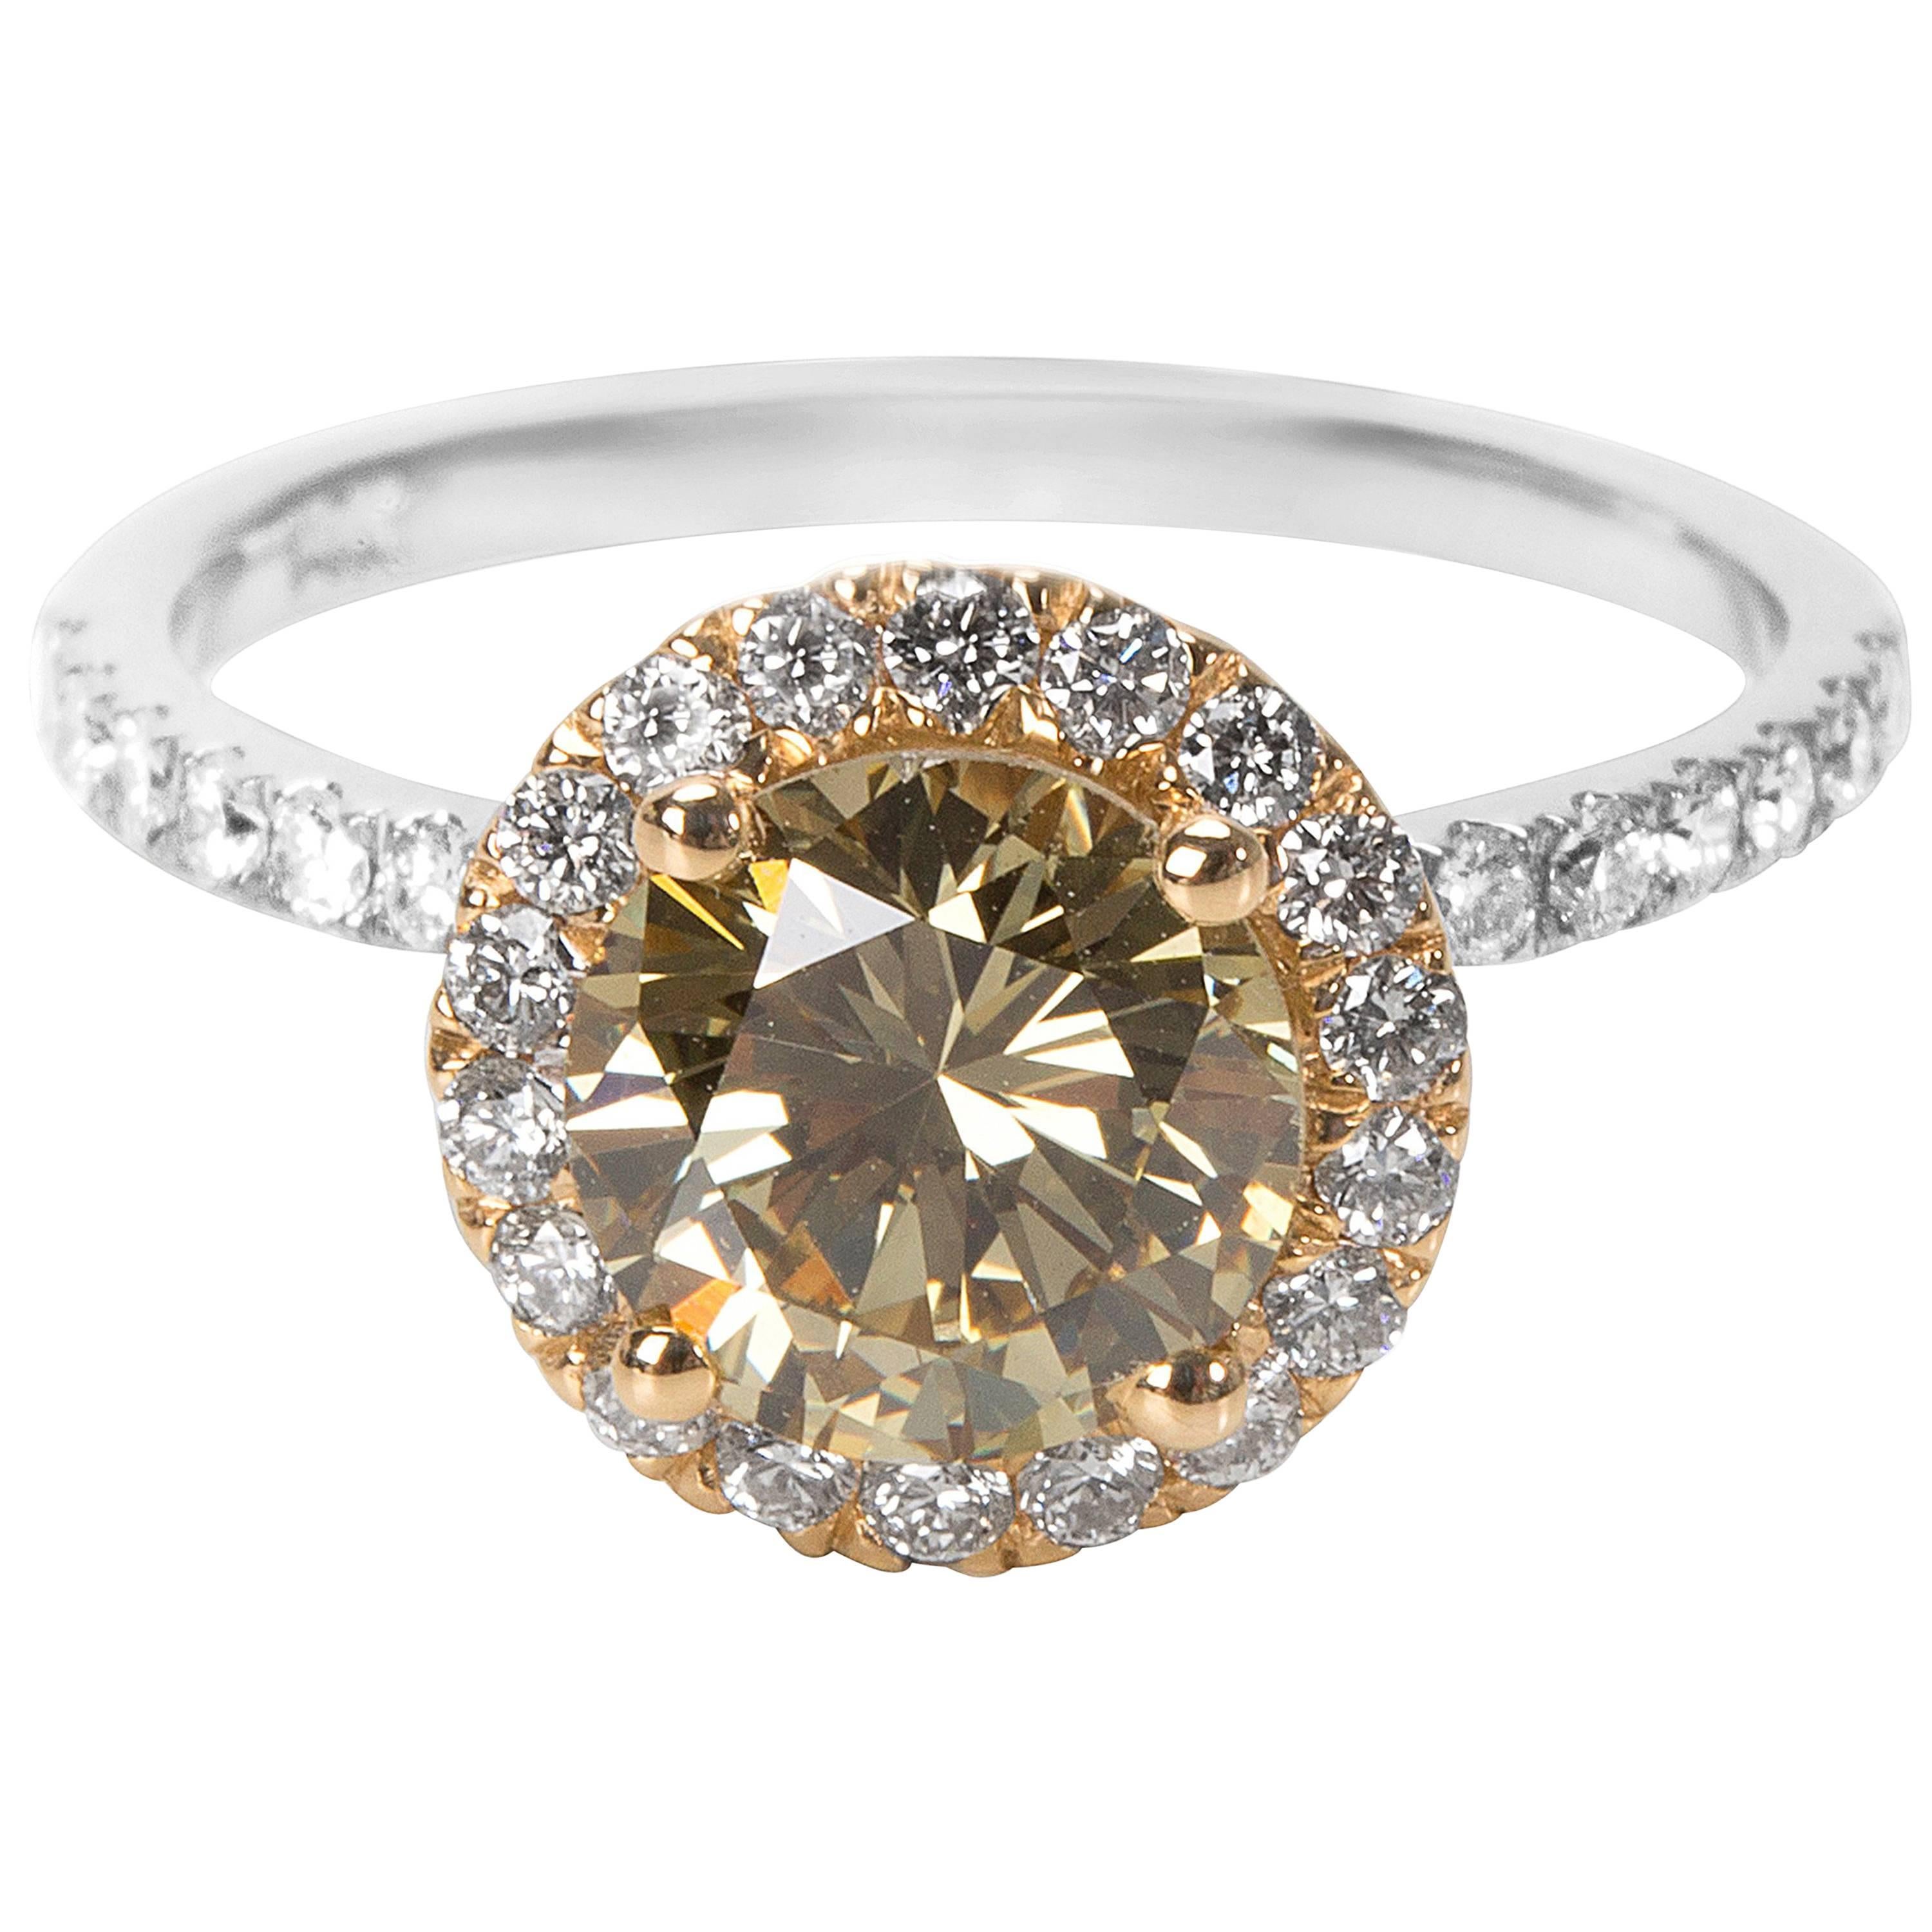 GIA Certified Brownish Yellow Diamond Engagement Ring in 14KT Gold 2.08 Carat